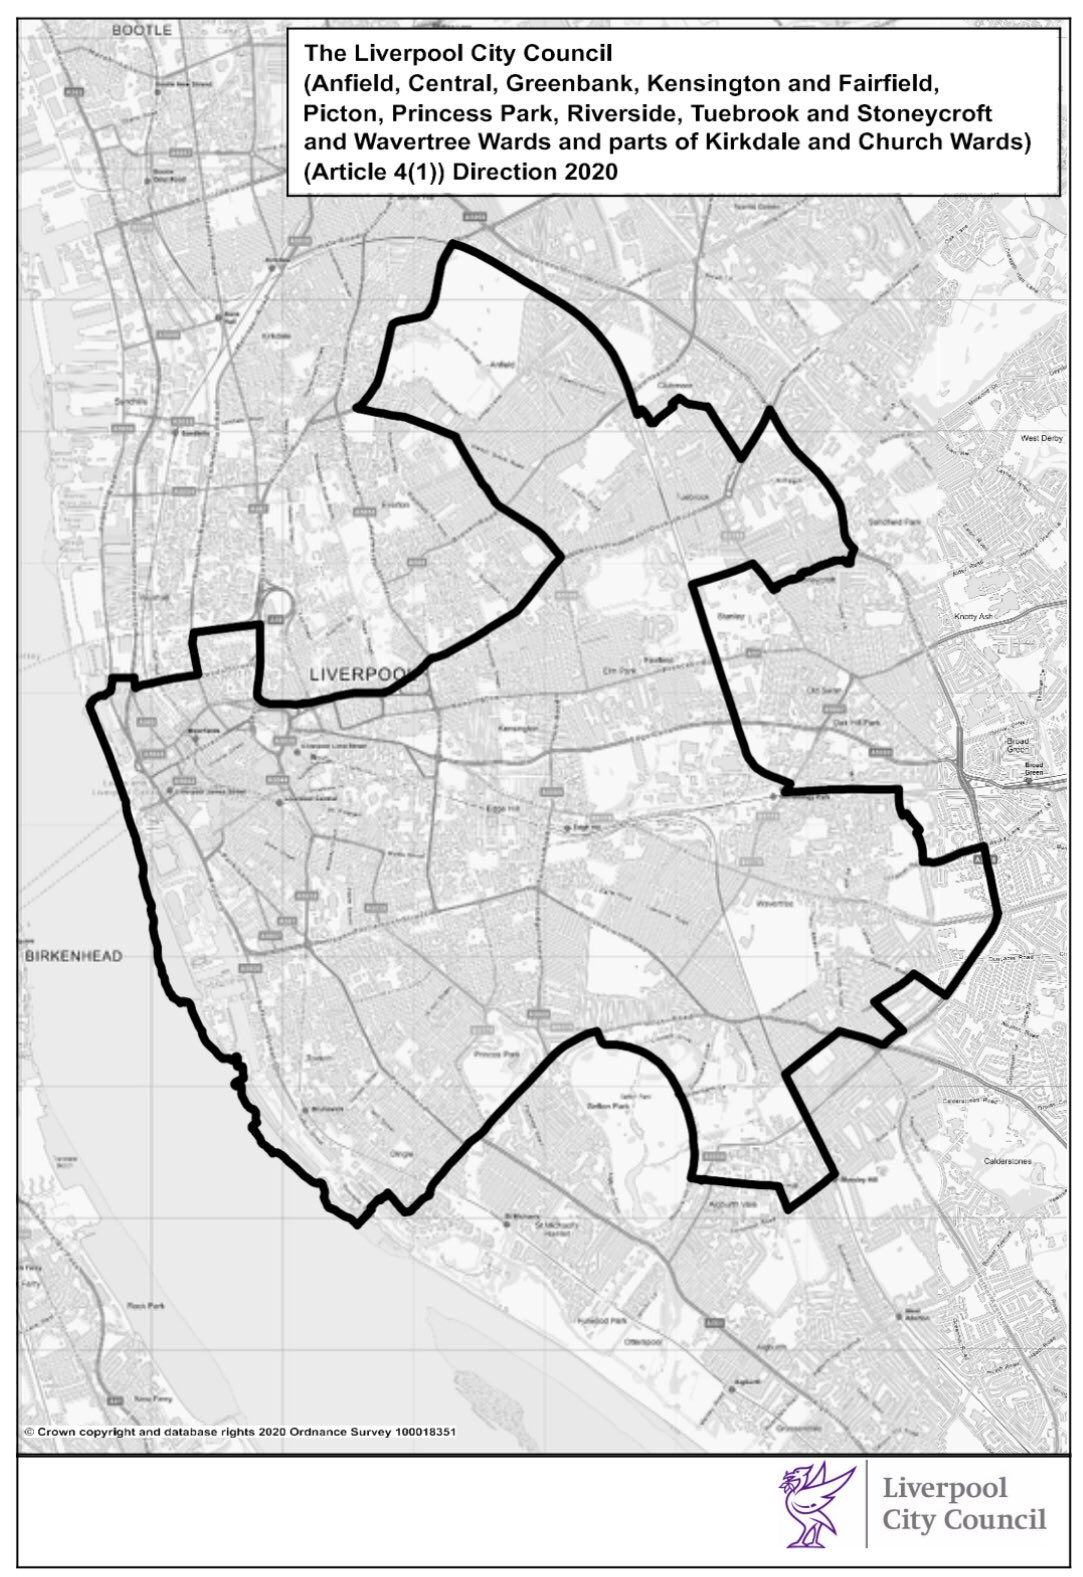 Liverpool HMO Article 4 map